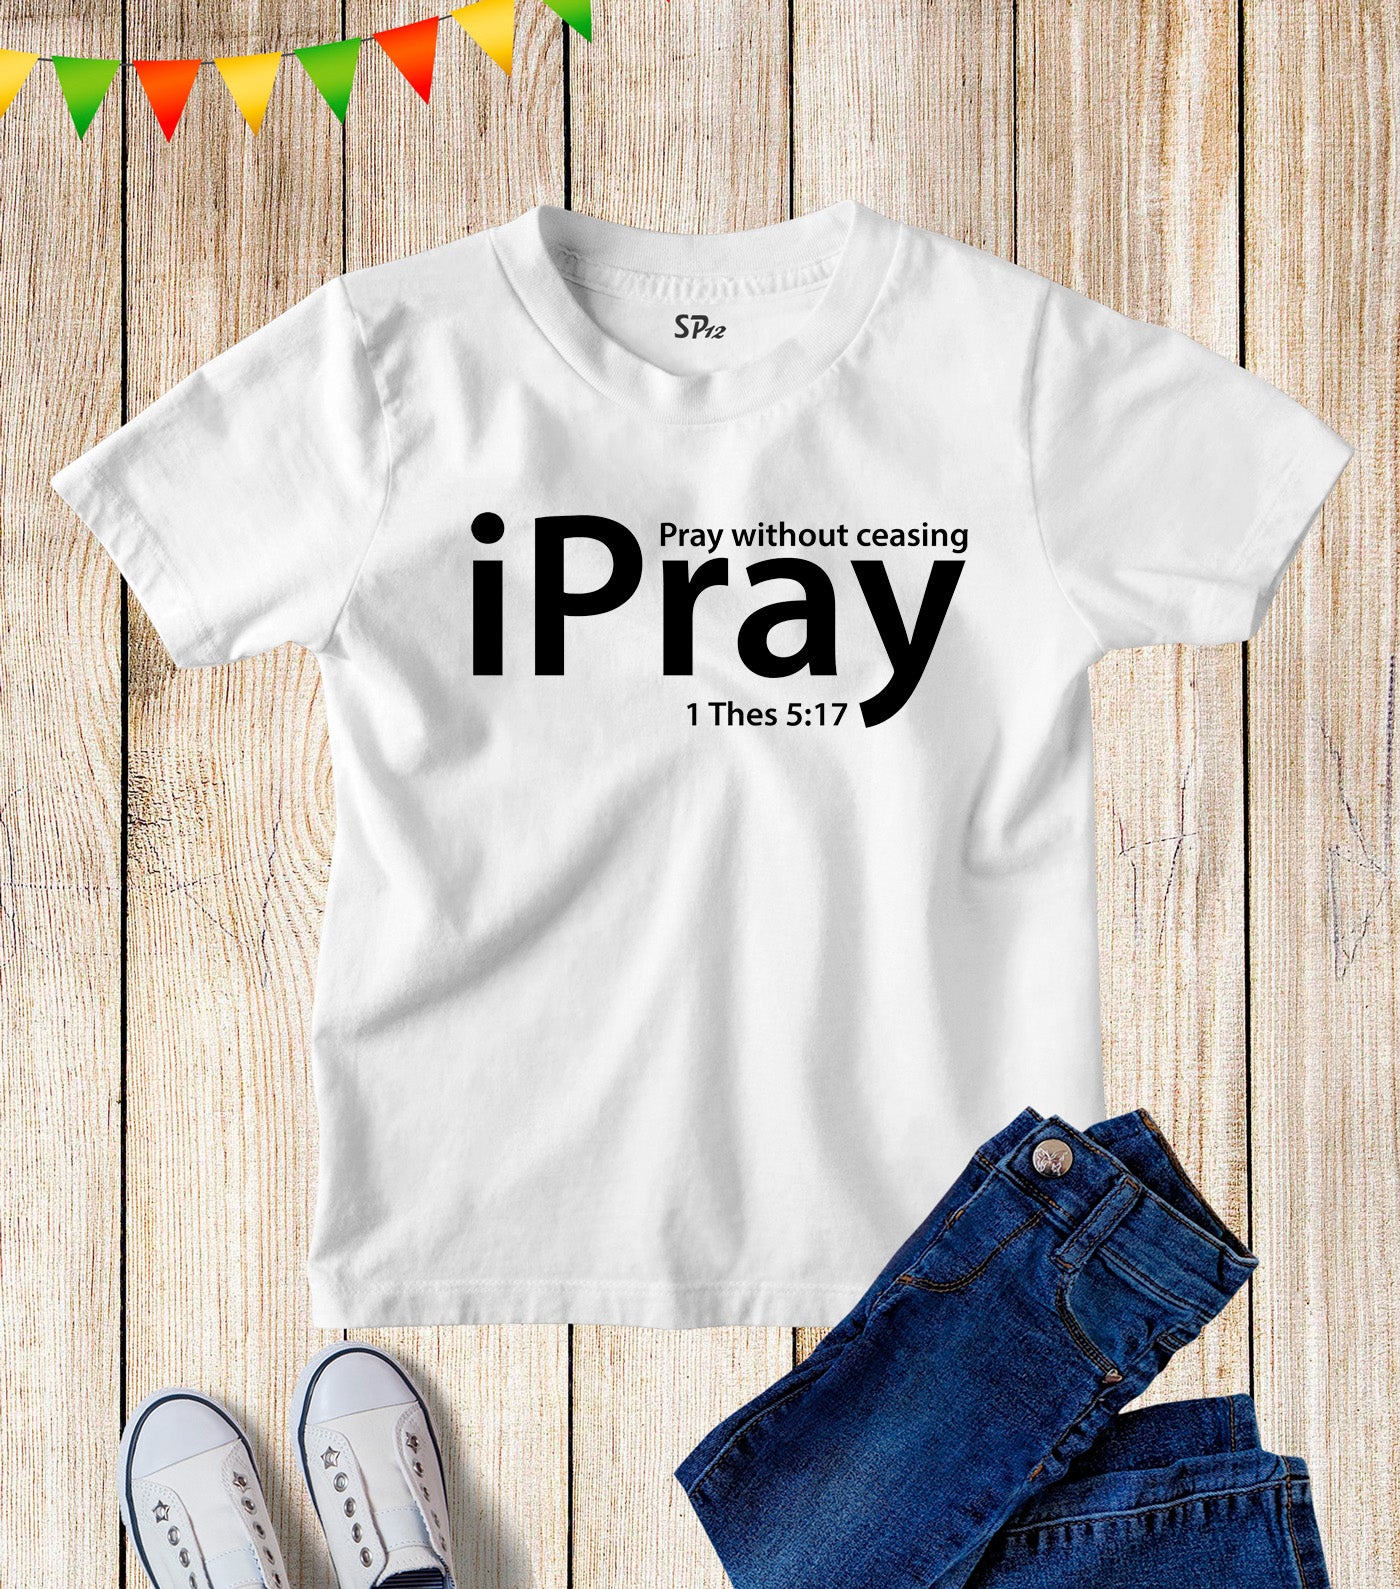 iPray Pray Without Ceasing Technology Game Christian Youth Church Kids T shirt